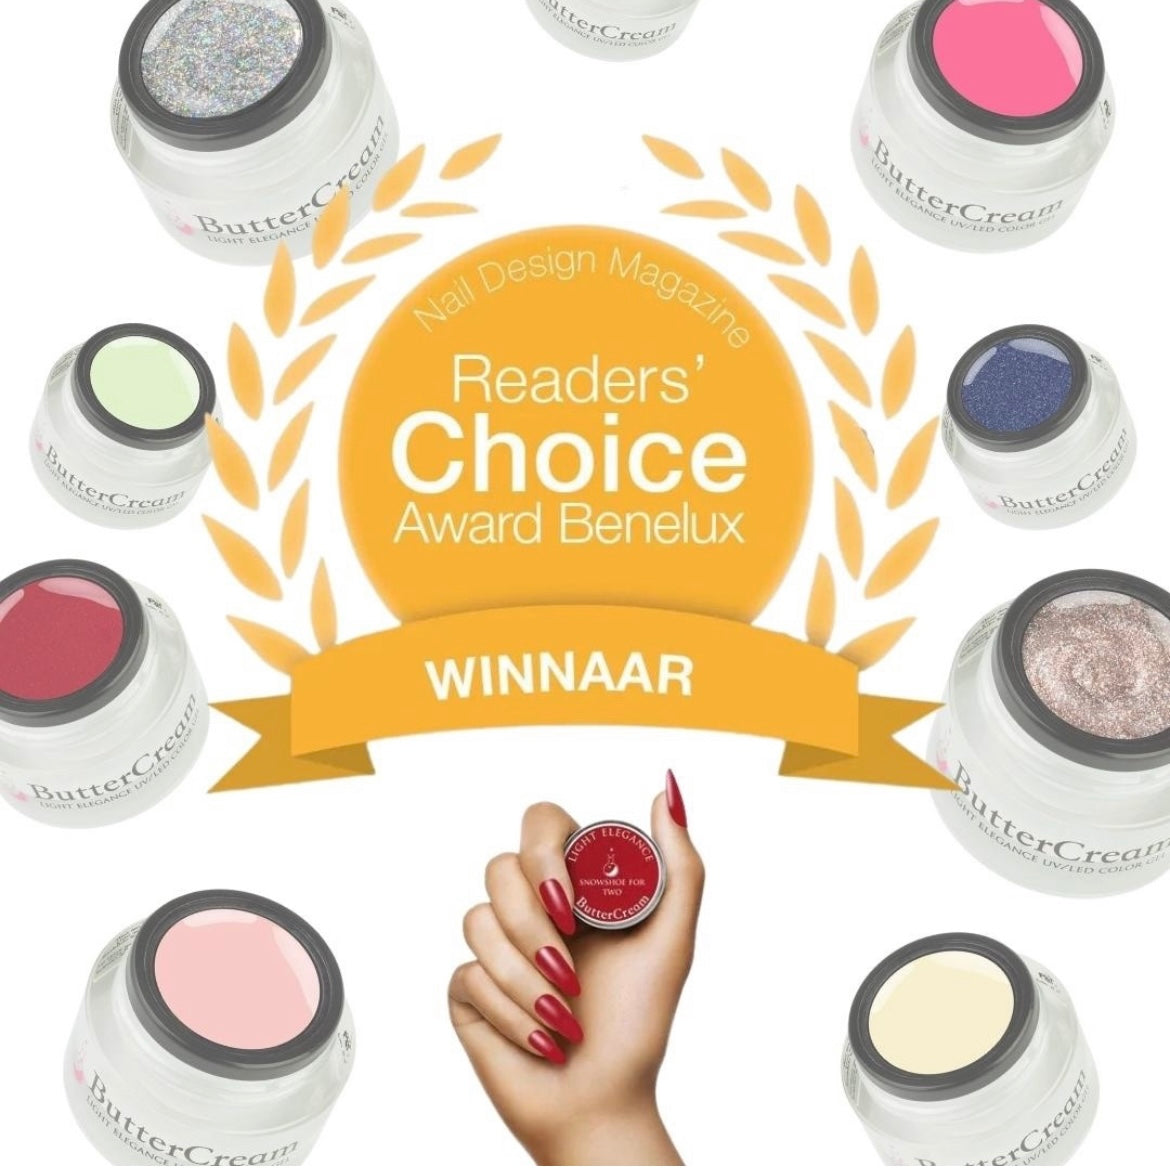 LE ButterCream Wins "Most Favorite Color Gel Product" in Belgium | Nail Design Magazine | A World-Wide Favorite!